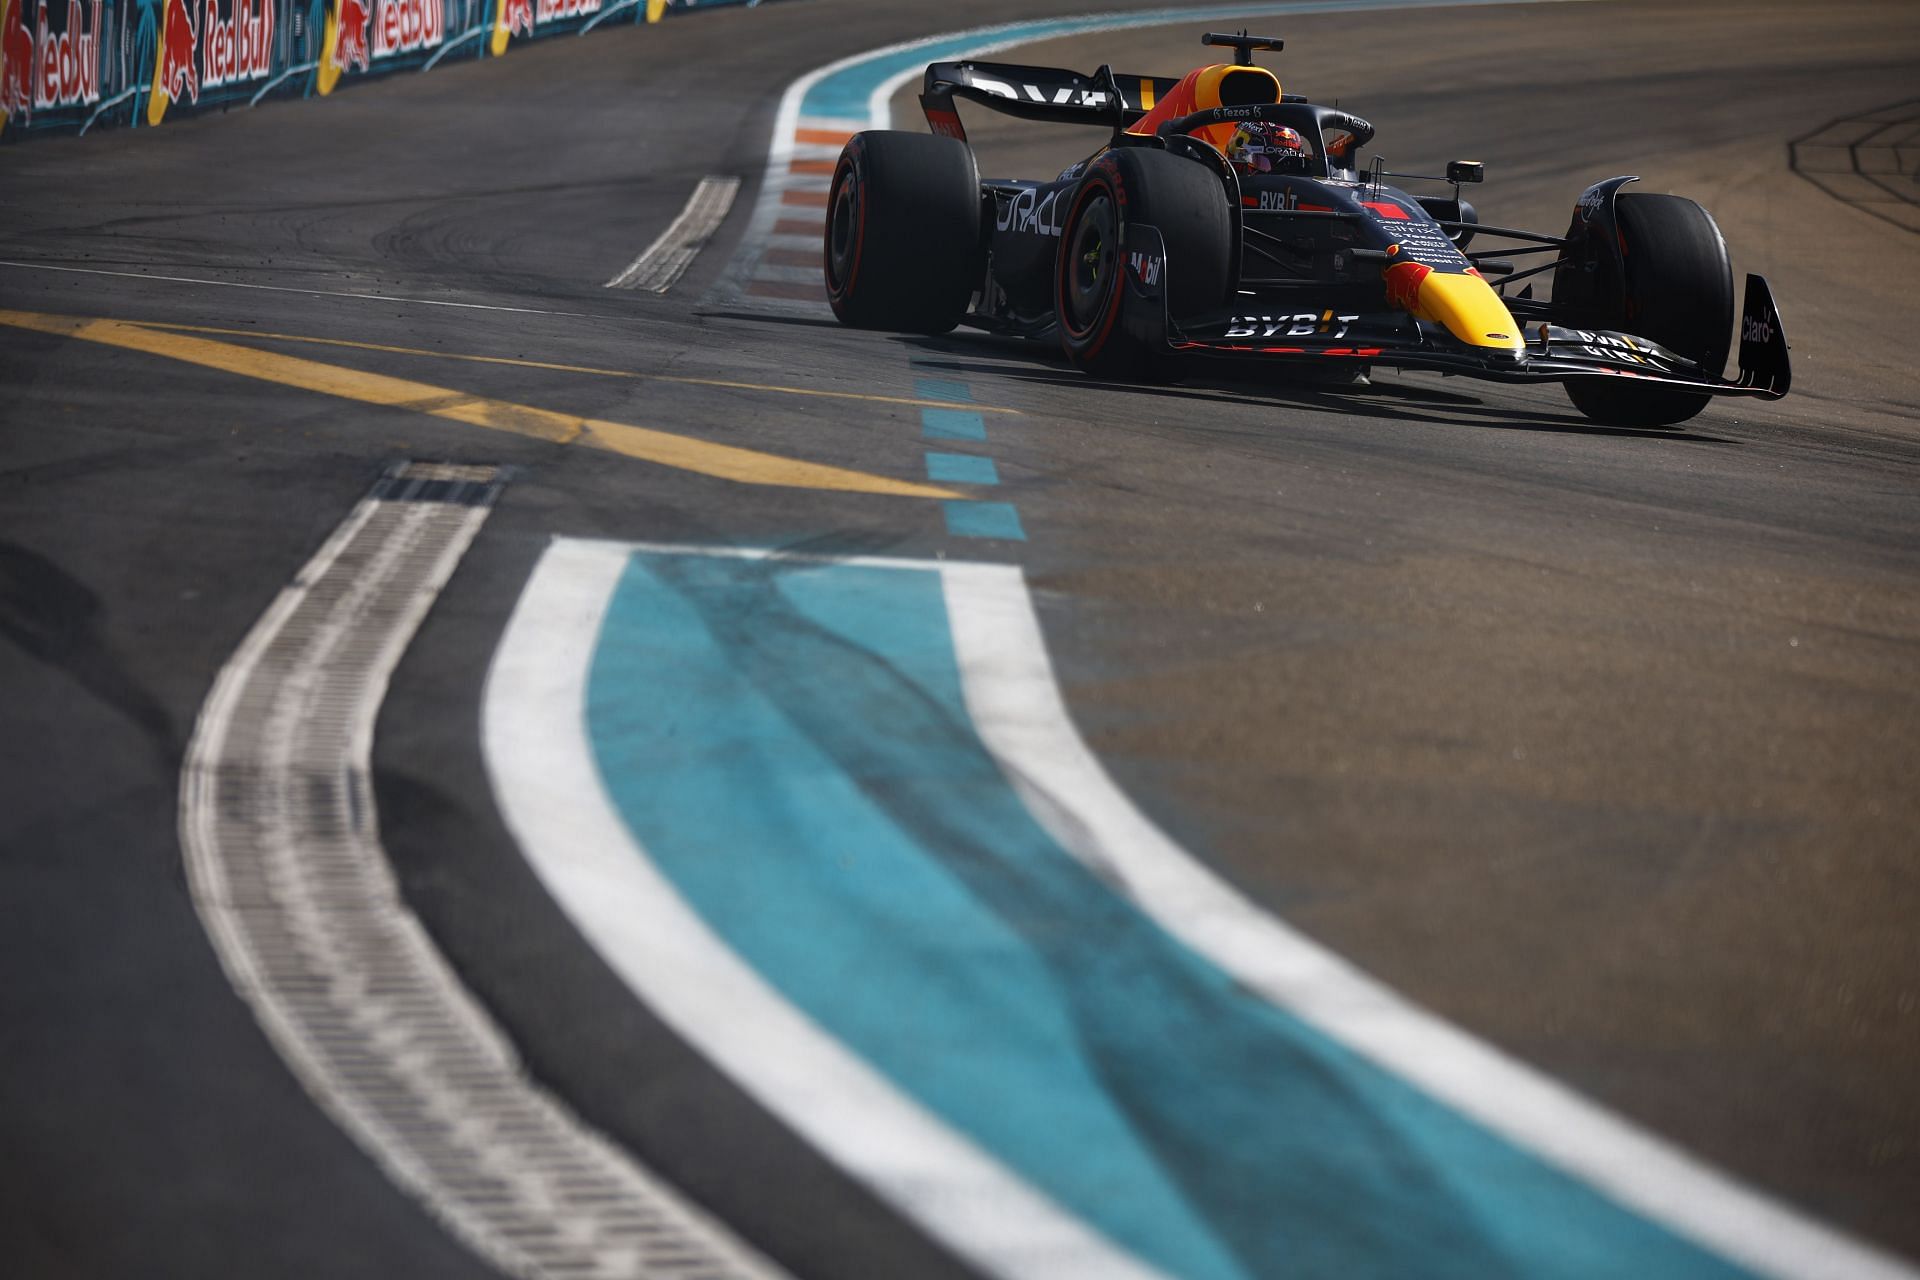 Red Bull&#039;s Max Verstappen in action during qualifying for the 2022 F1 Miami GP. (Photo by Jared C. Tilton/Getty Images)